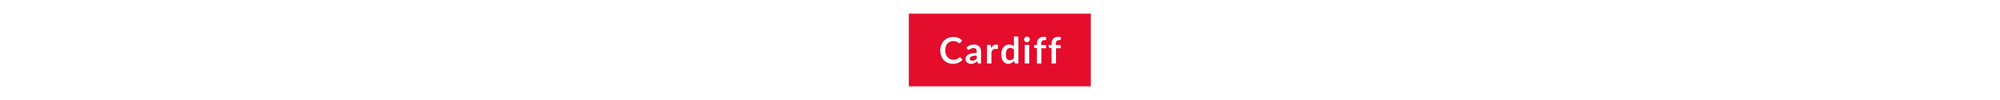 The word Cardiff in a red box